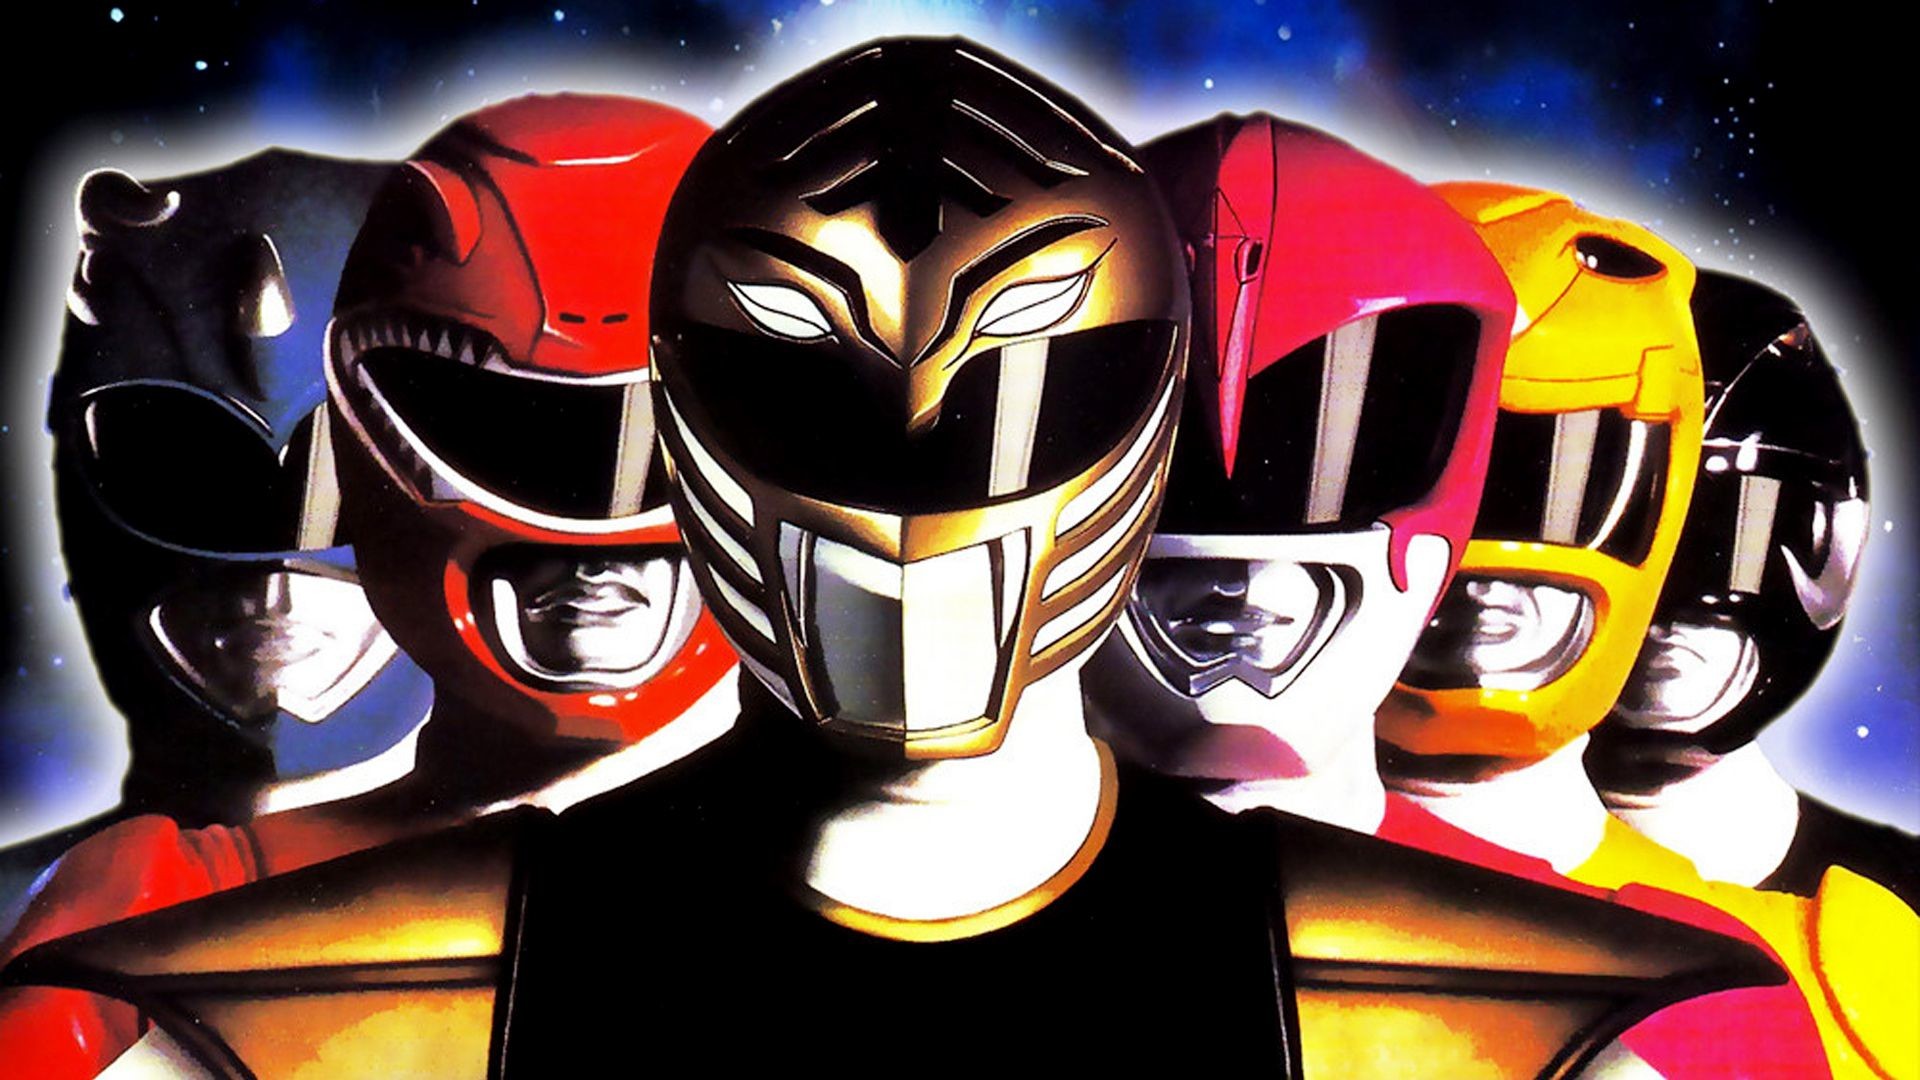 1920x1080 Power Rangers Images Wallpapers (43 Wallpapers)